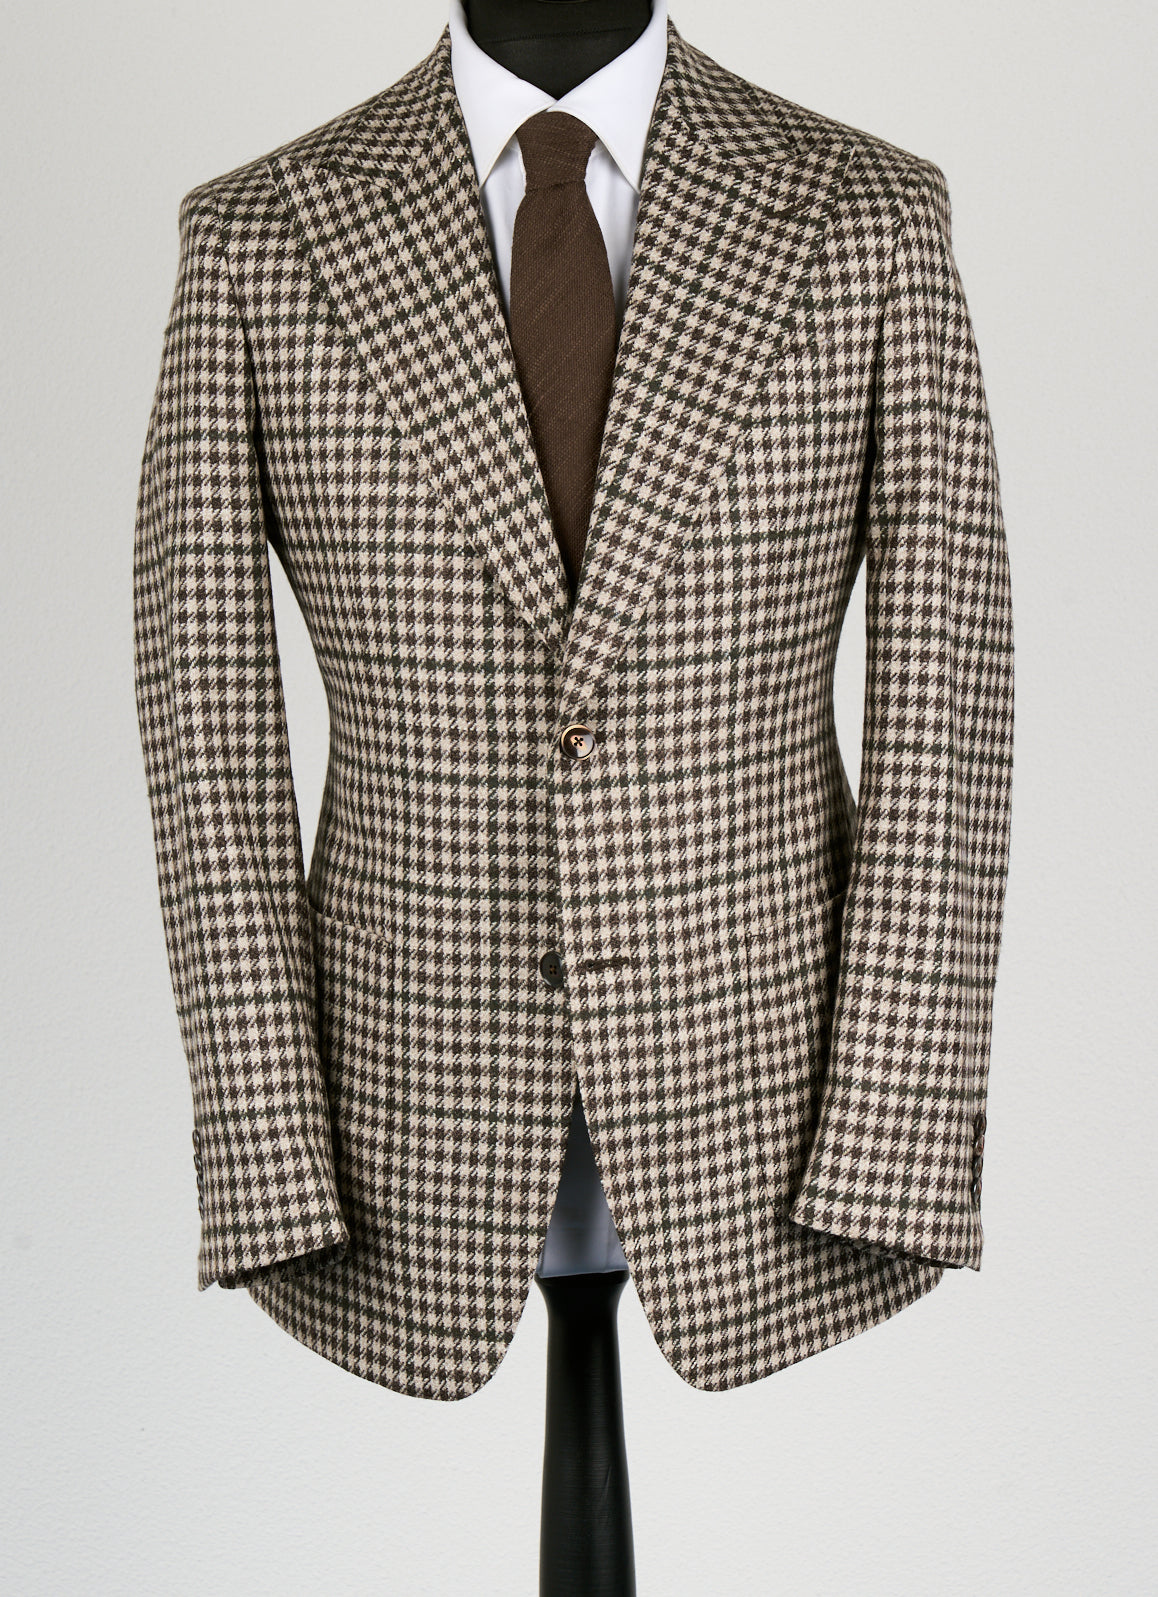 New SUITREVIEW Elmhurst Brown/Green Houndstooth Wool and Silk Luxury Blazer - Size 38R and 42S